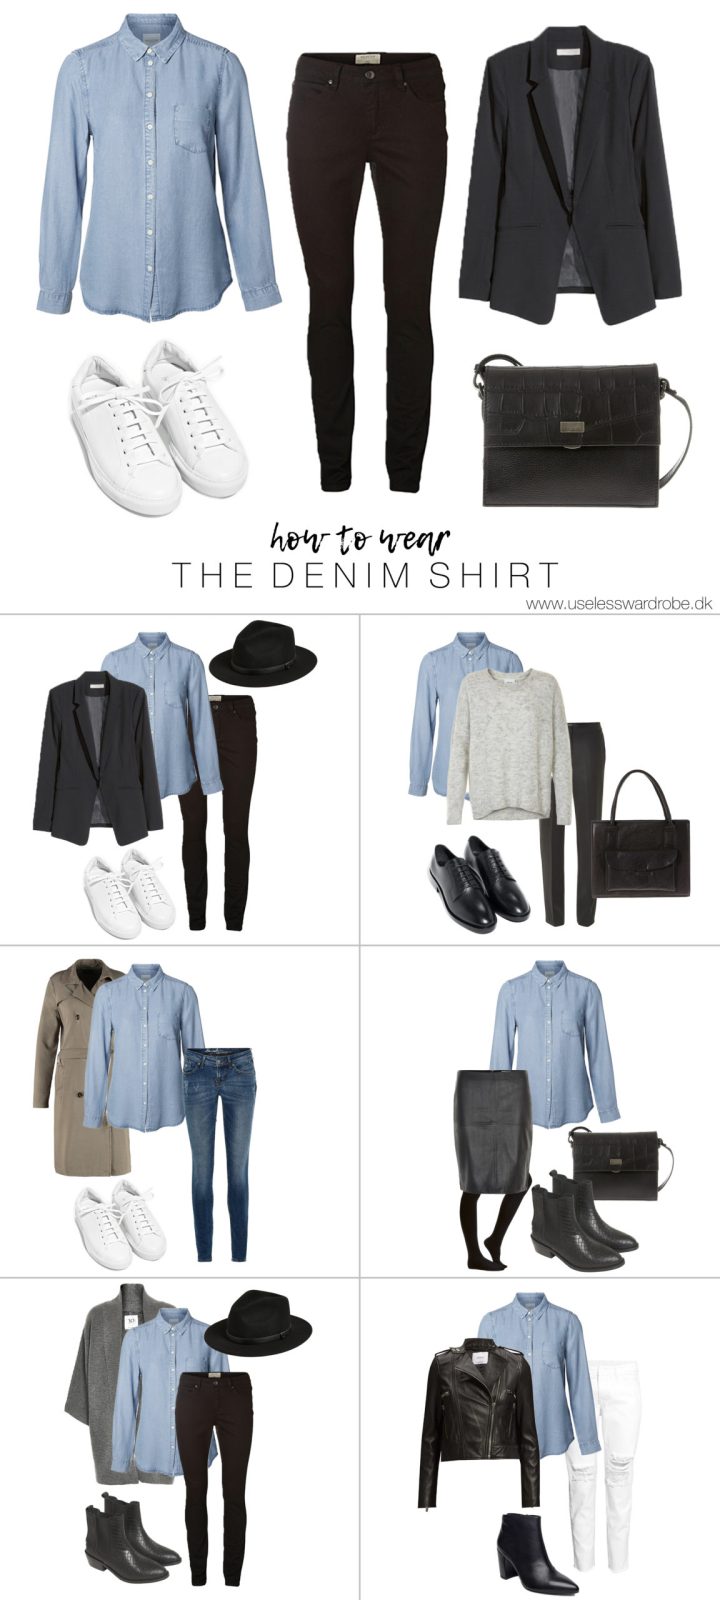 How to wear: the denim shirt.